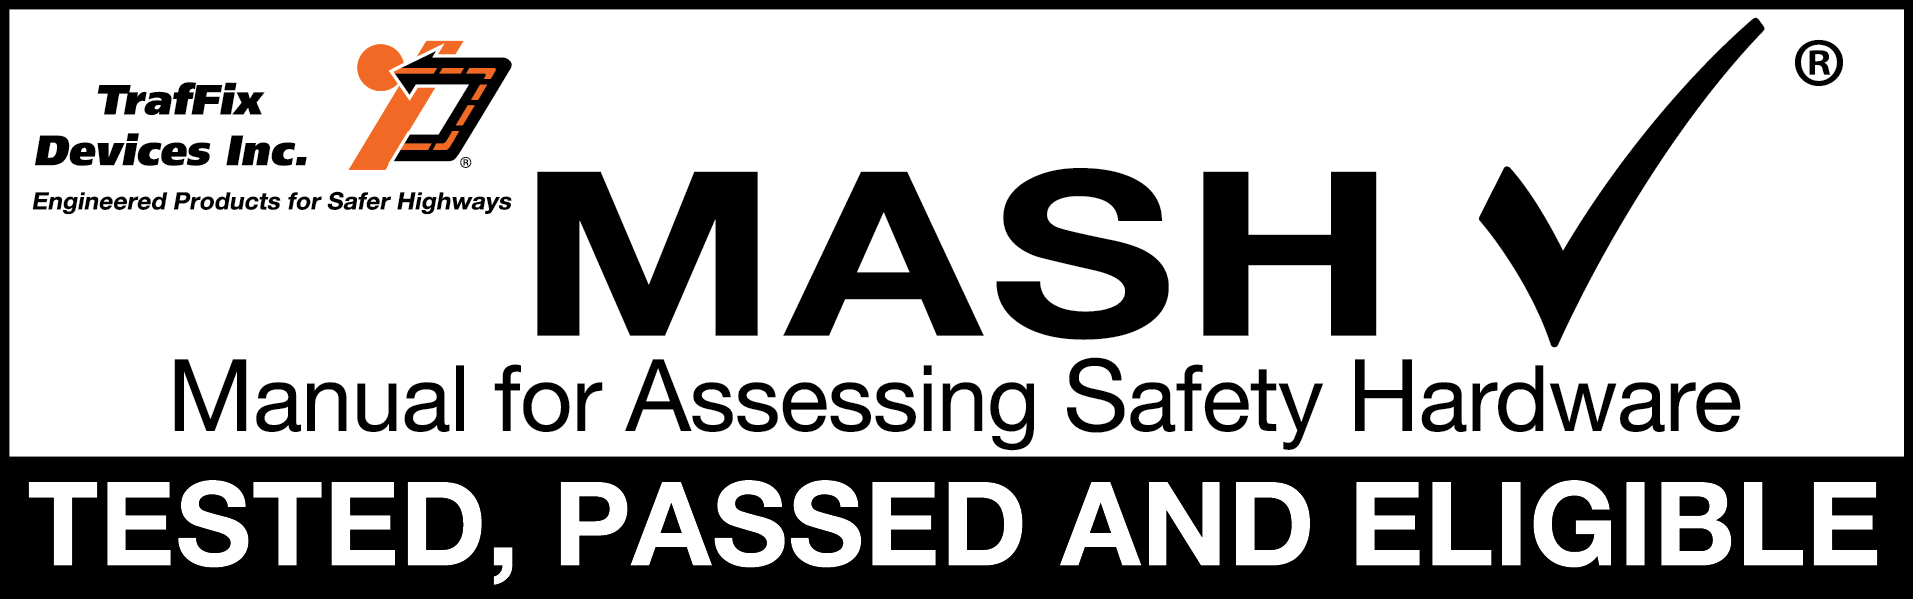 MASH (Manual for Assessing Safety Hardware) Tested, Passed and Eligible